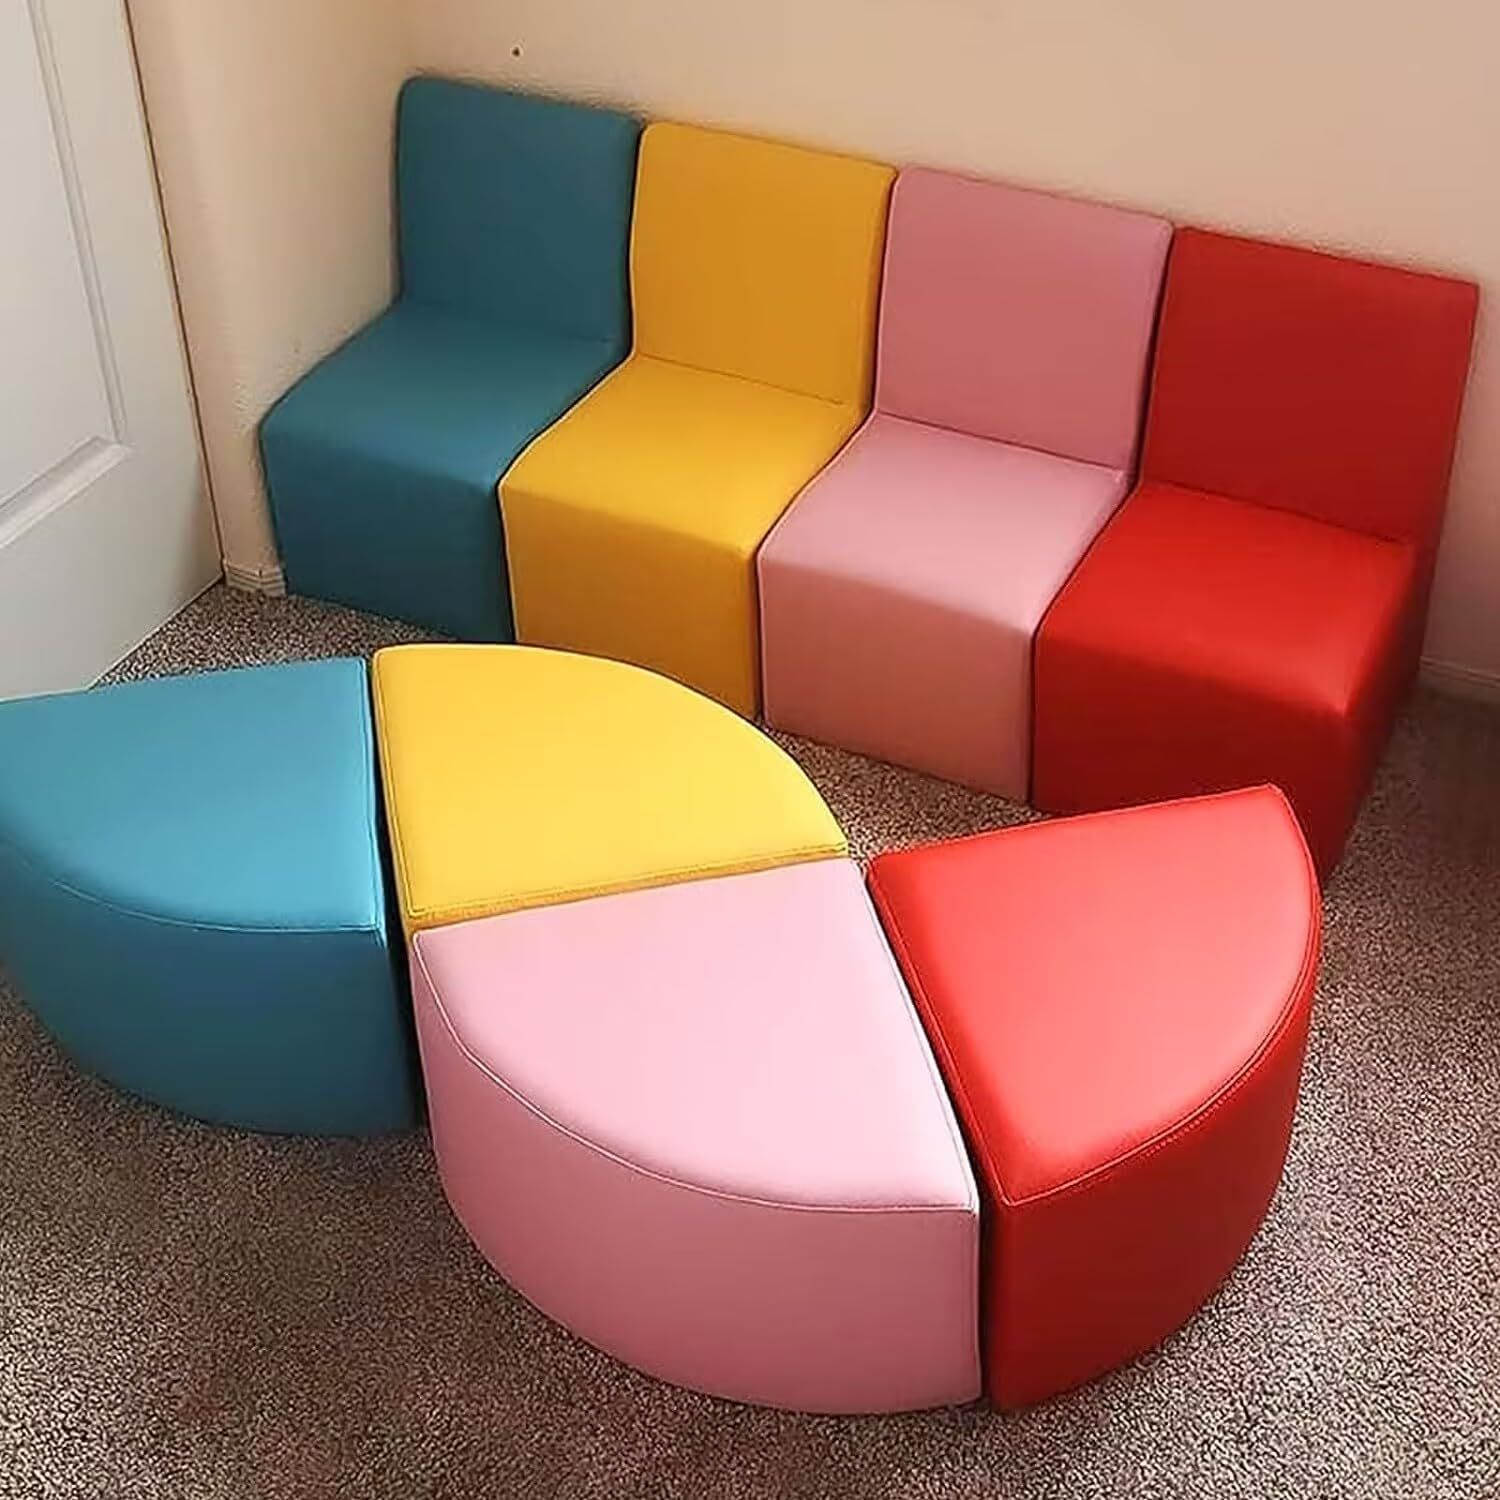 Fascinating Kids Sofa for your loved one